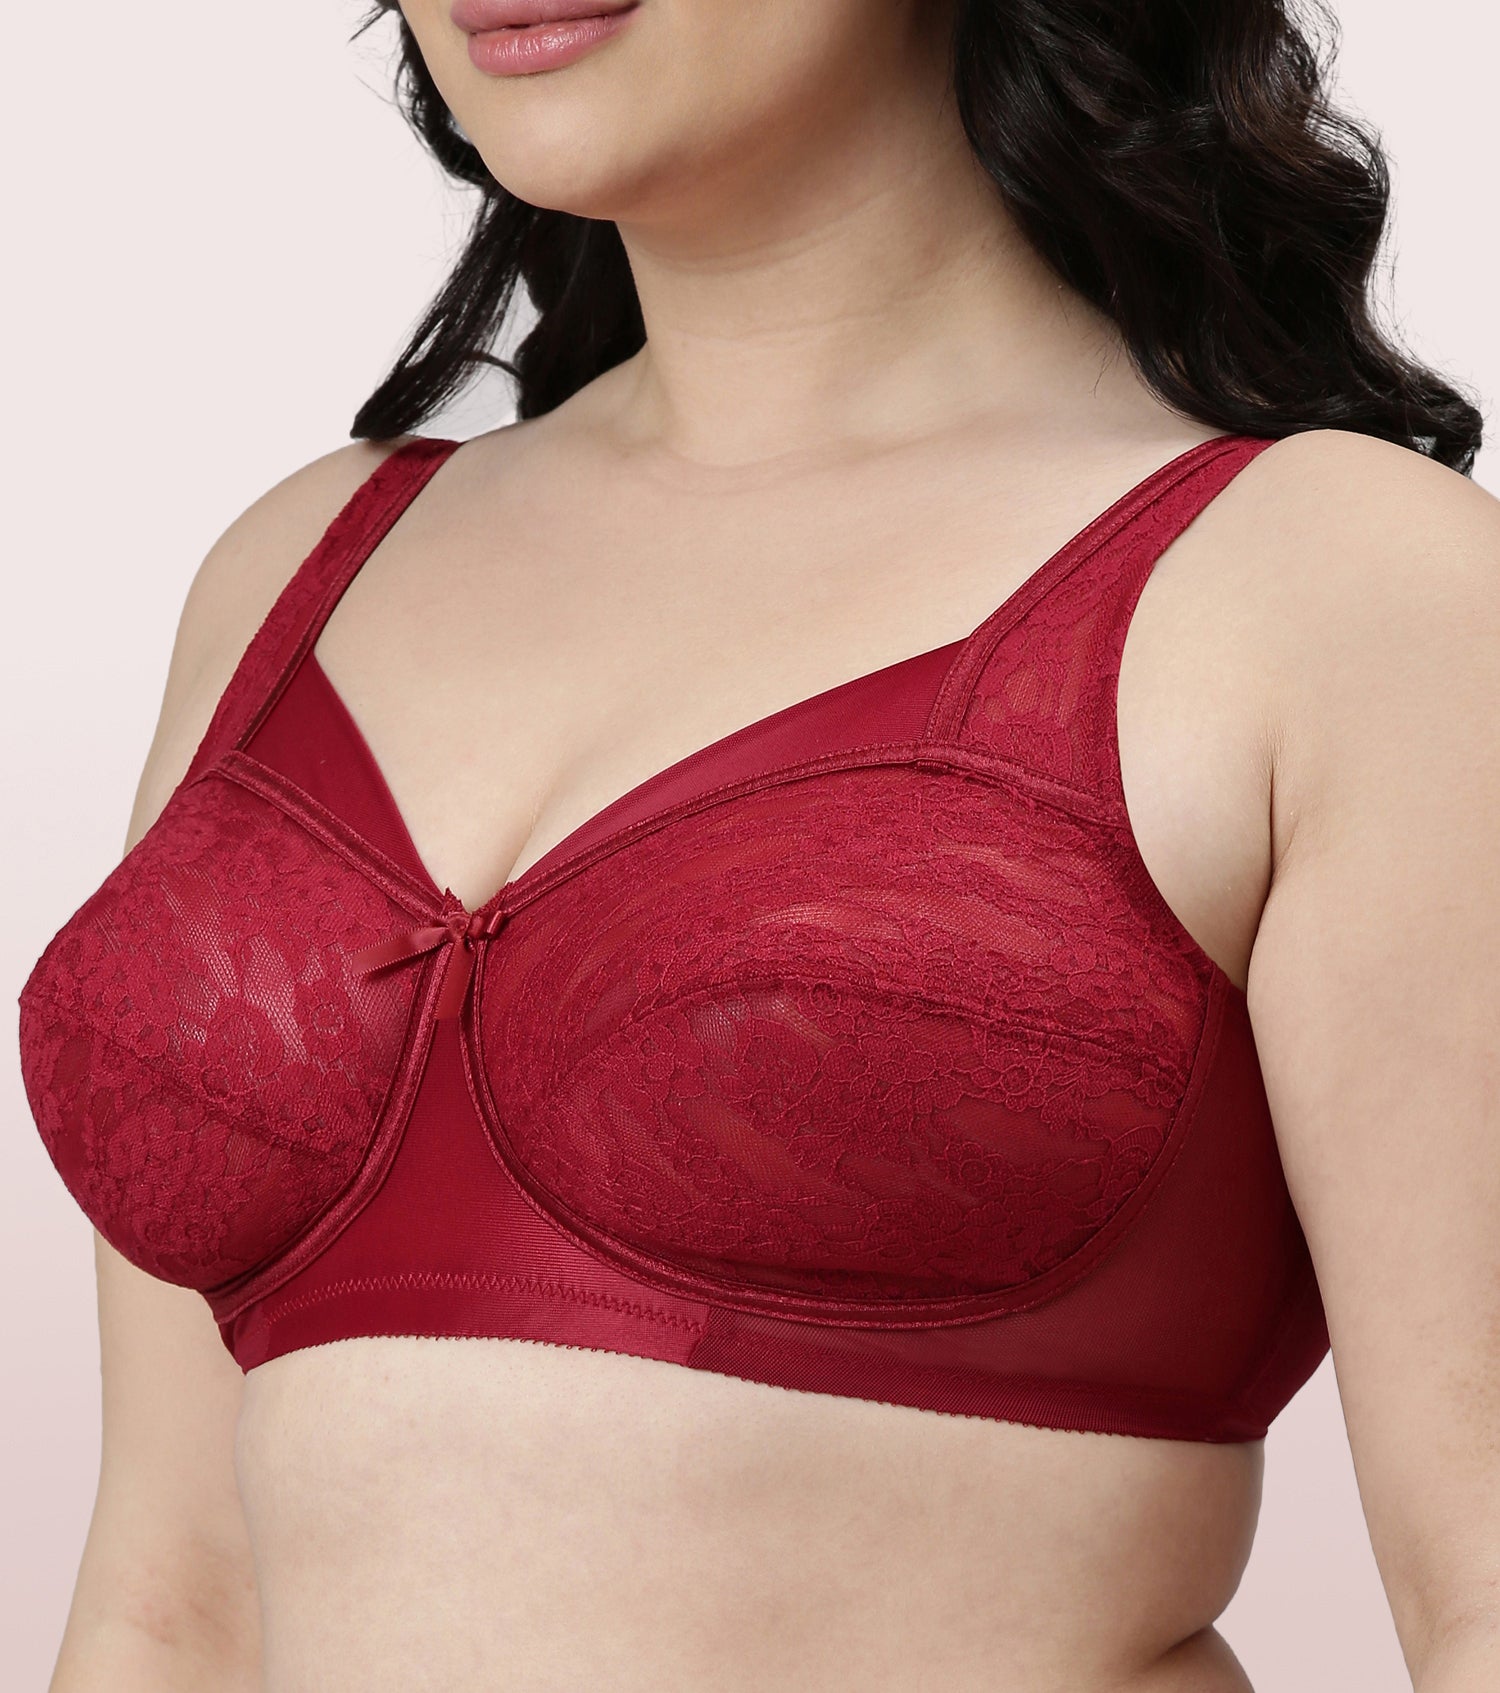 Buy Enamor A014 M-Frame Contouring Full Support Bra Cotton Non